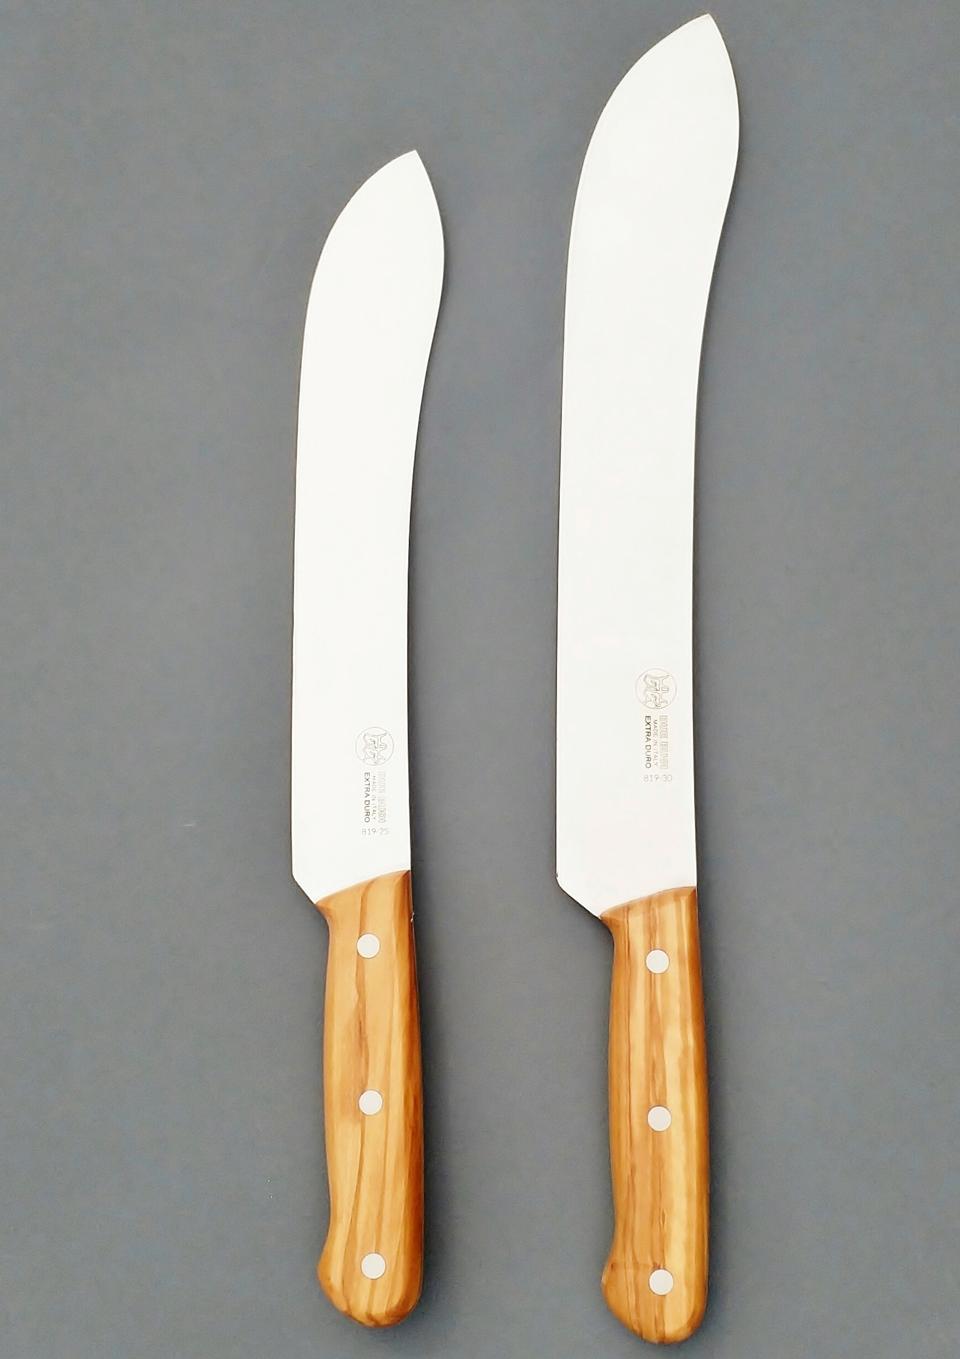 BBQ SET: TWO SABER KNIVES BLADE LENGHT 25 AND 30 CM. - OLIVE WOOD HANDLE